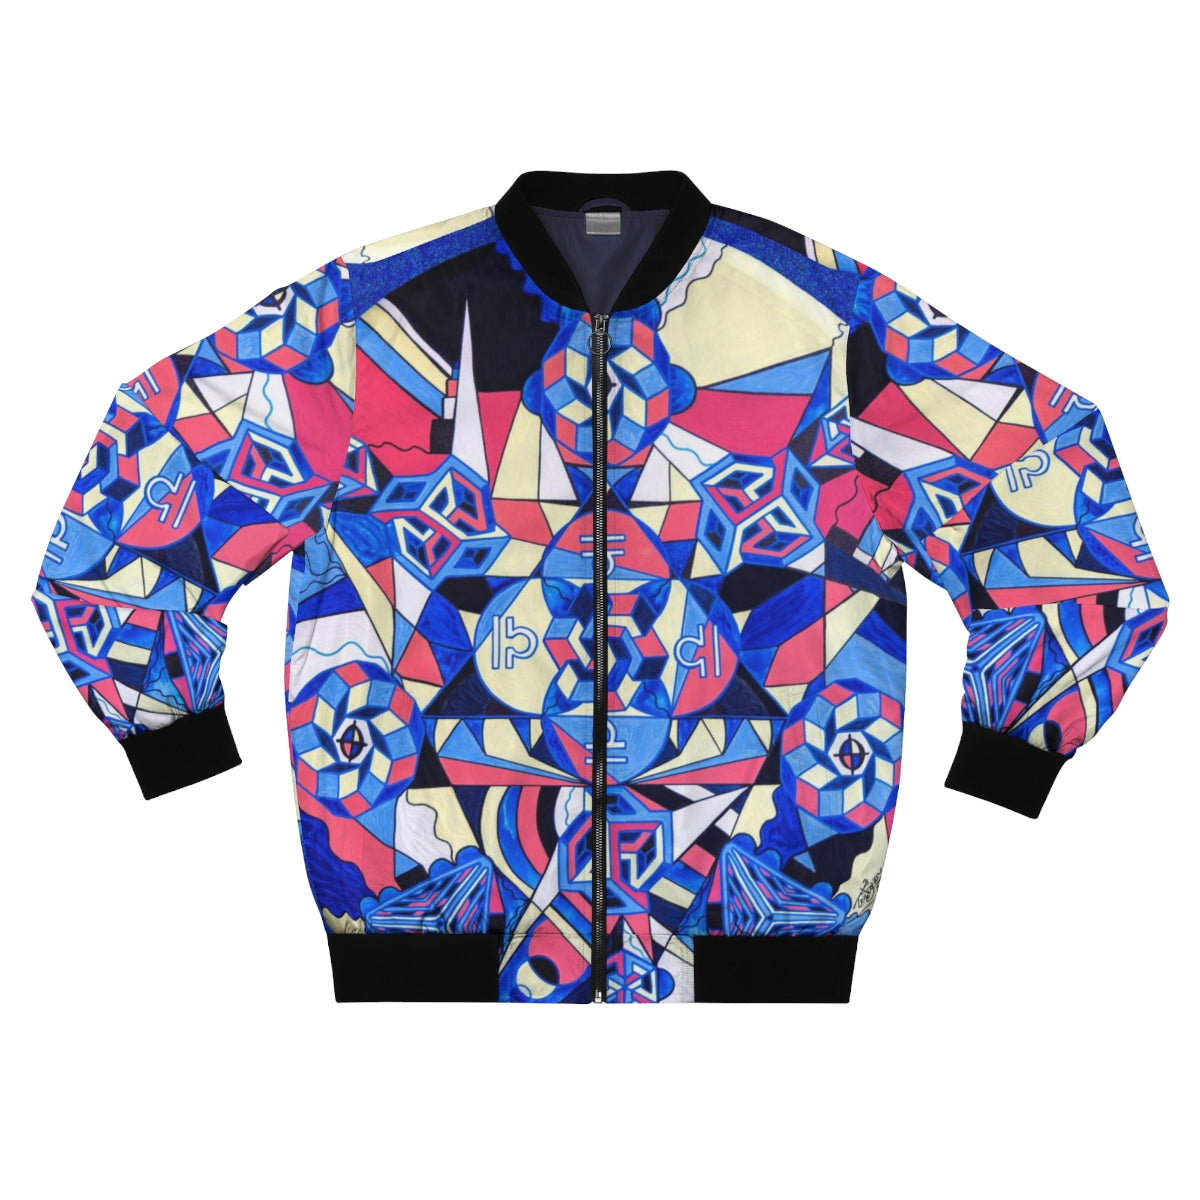 find-something-new-to-wear-the-right-arrangement-bomber-jacket-hot-on-sale_1.jpg